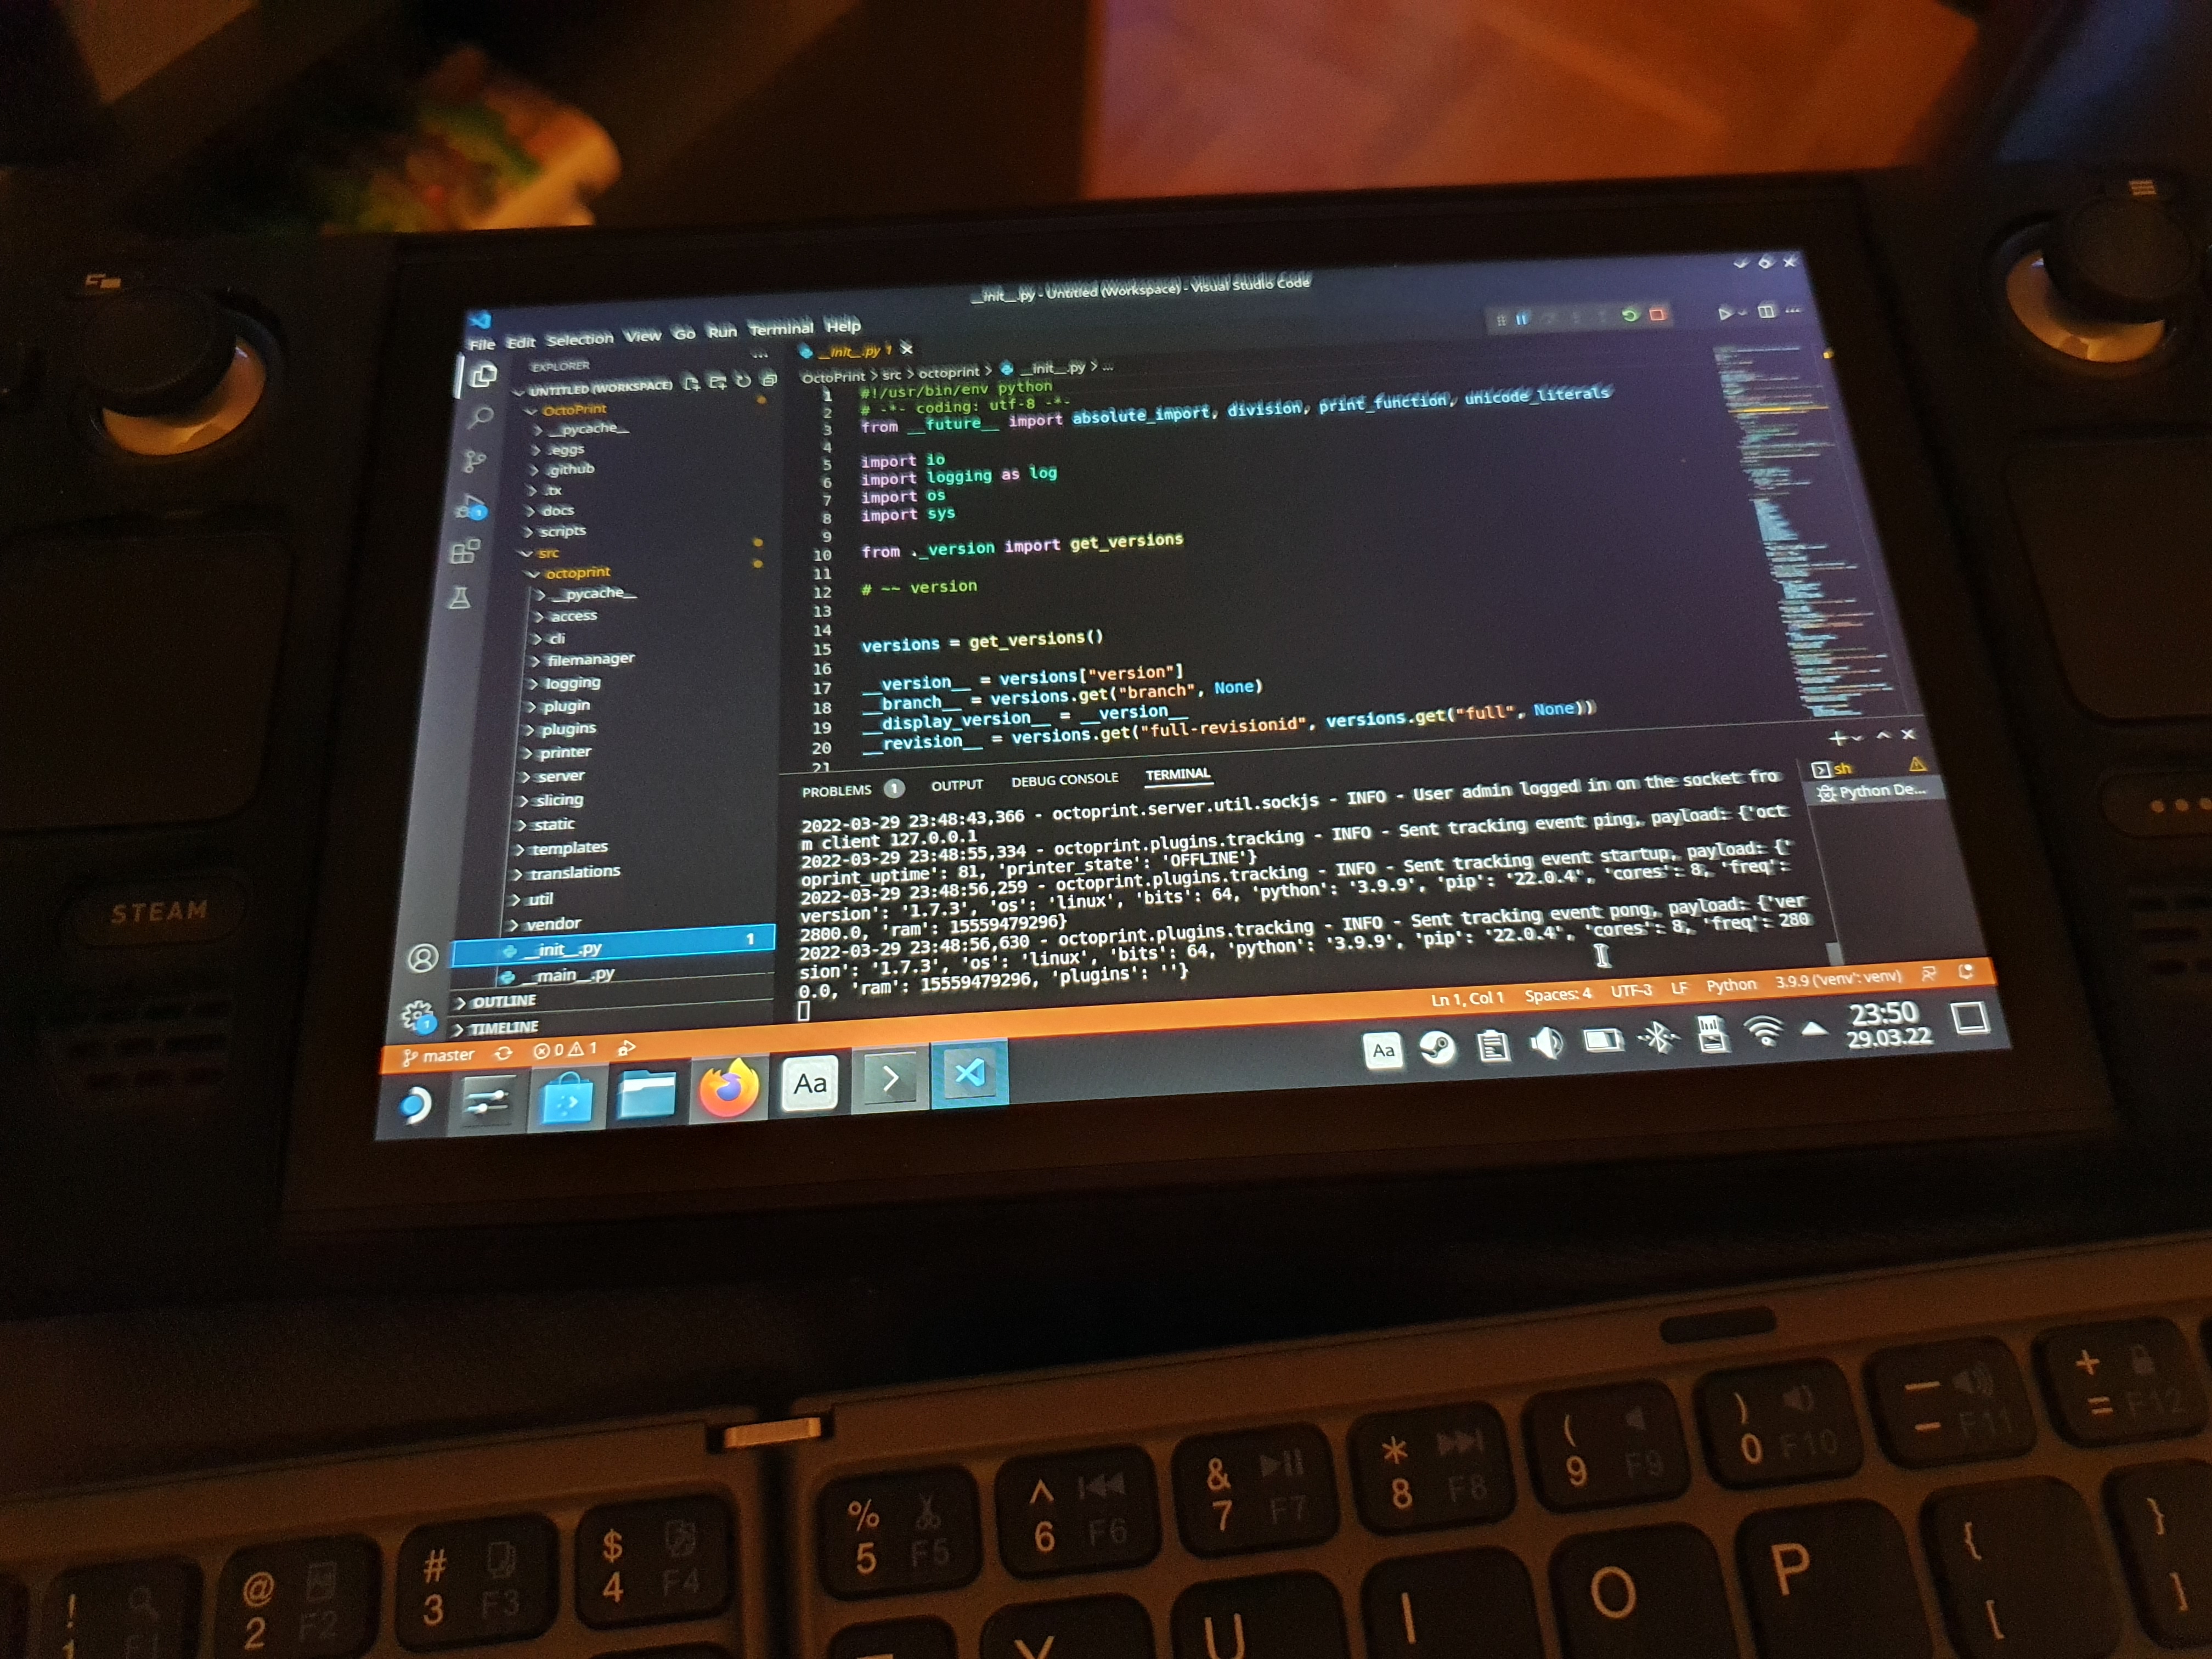 Visual Studio Code with OctoPrint&rsquo;s code running on a Steamdeck in desktop mode. In front of the deck there&rsquo;s a foldable Bluetooth keyboard.